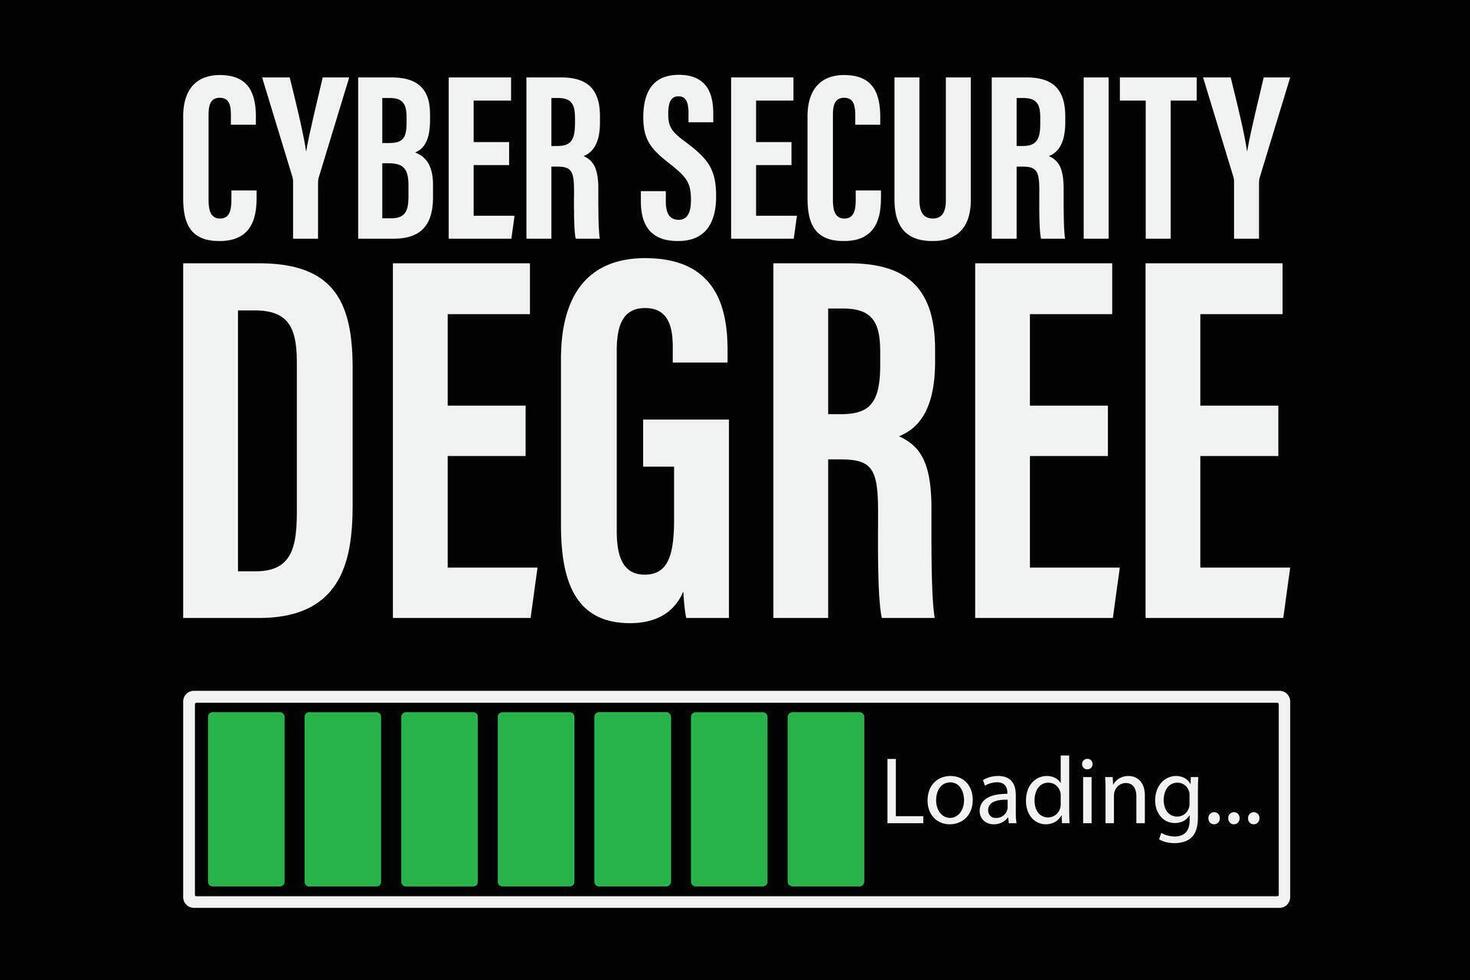 Cyber Security Degree Loading Funny College Graduate T-Shirt vector